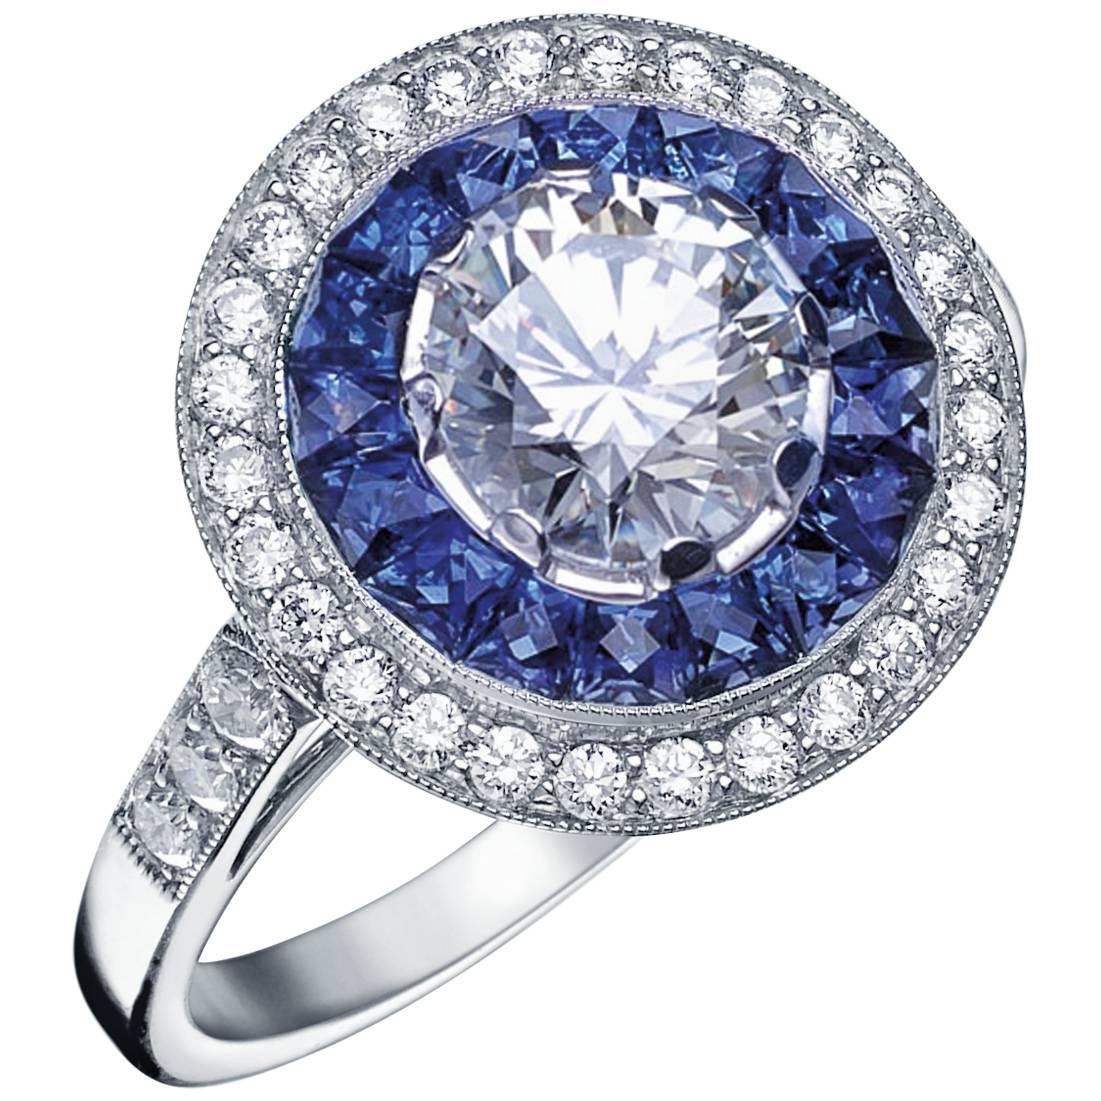 'Victorine' Ring Designed by Valerie Danenberg Set with Caliber Cut Sapphires For Sale